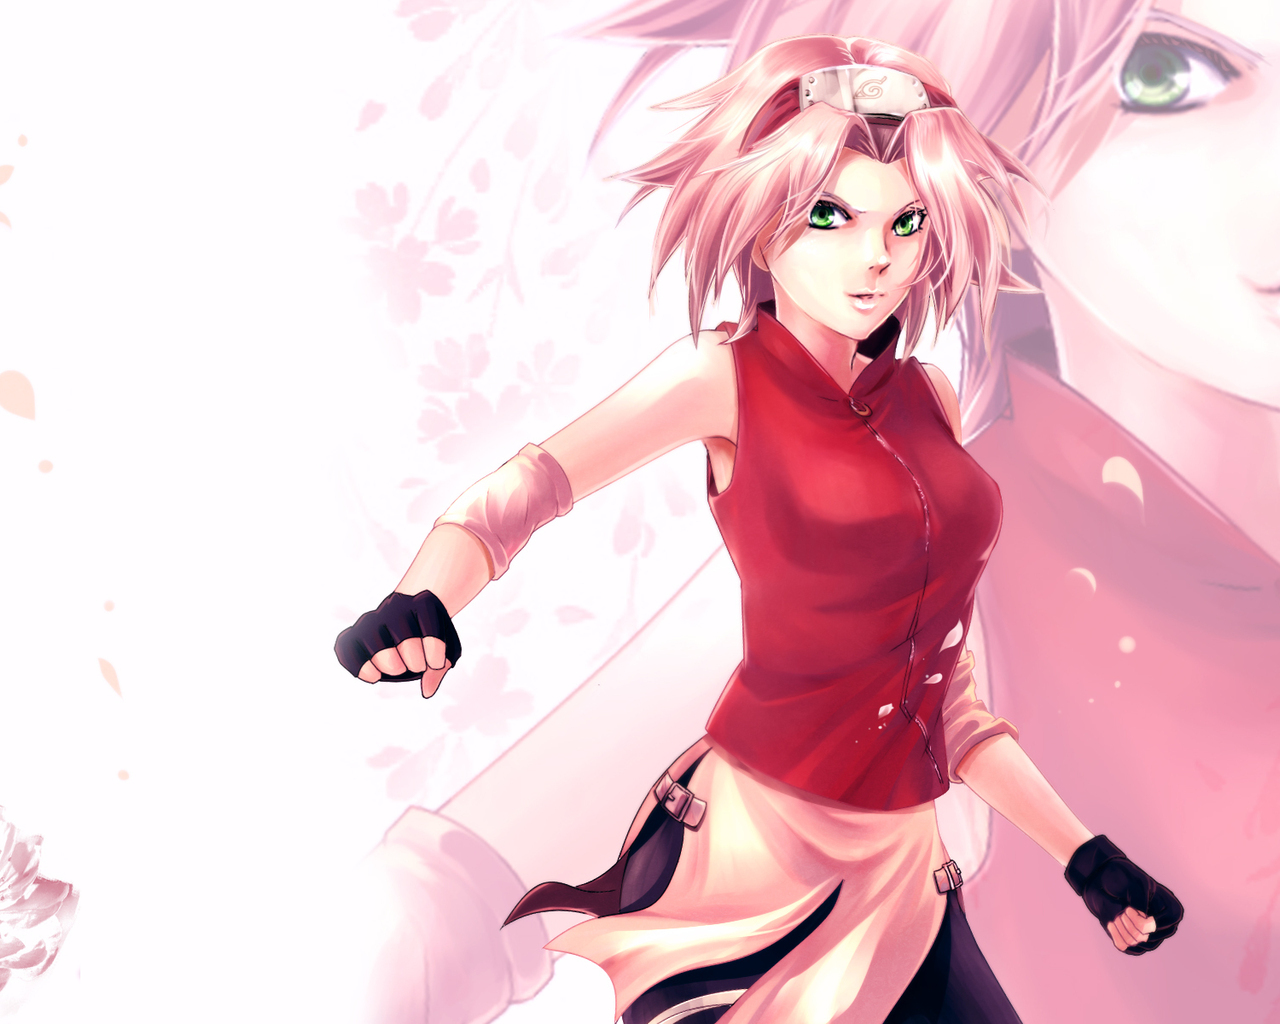 16992 download wallpaper naruto, anime, girls, red screensavers and pictures for free